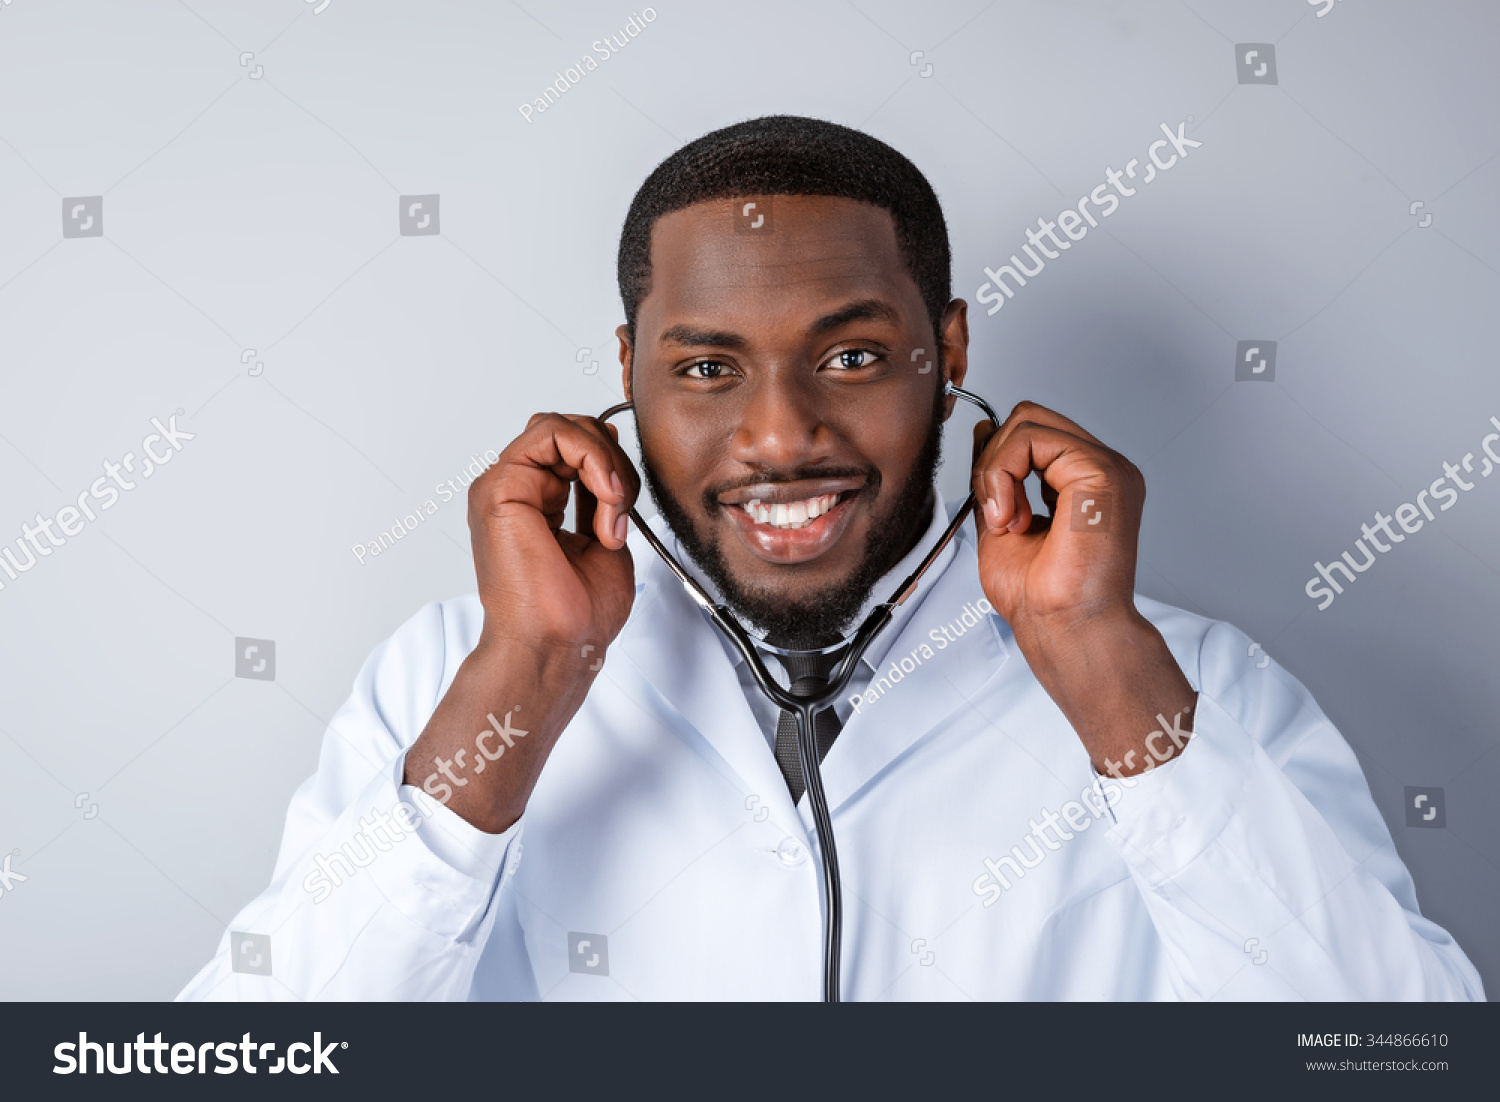 Portrait of male afro american doctor with stethoscope and lab coat. Young doctor smiling and looking at camera. Man standing on grey background #344866610